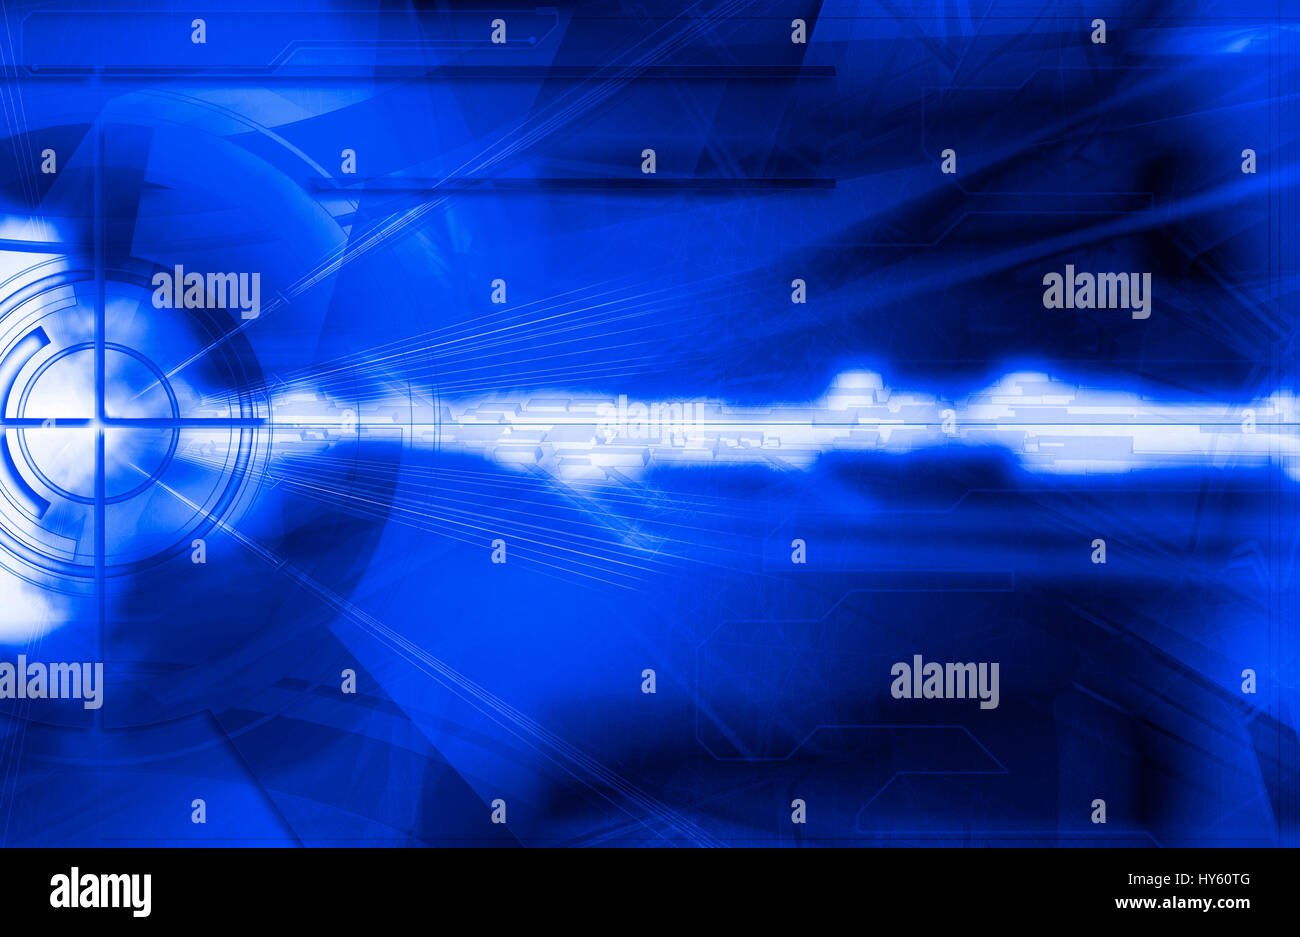 Abstract Digital virtual high-tech background with bright blue colors and special effects. Stock Photo